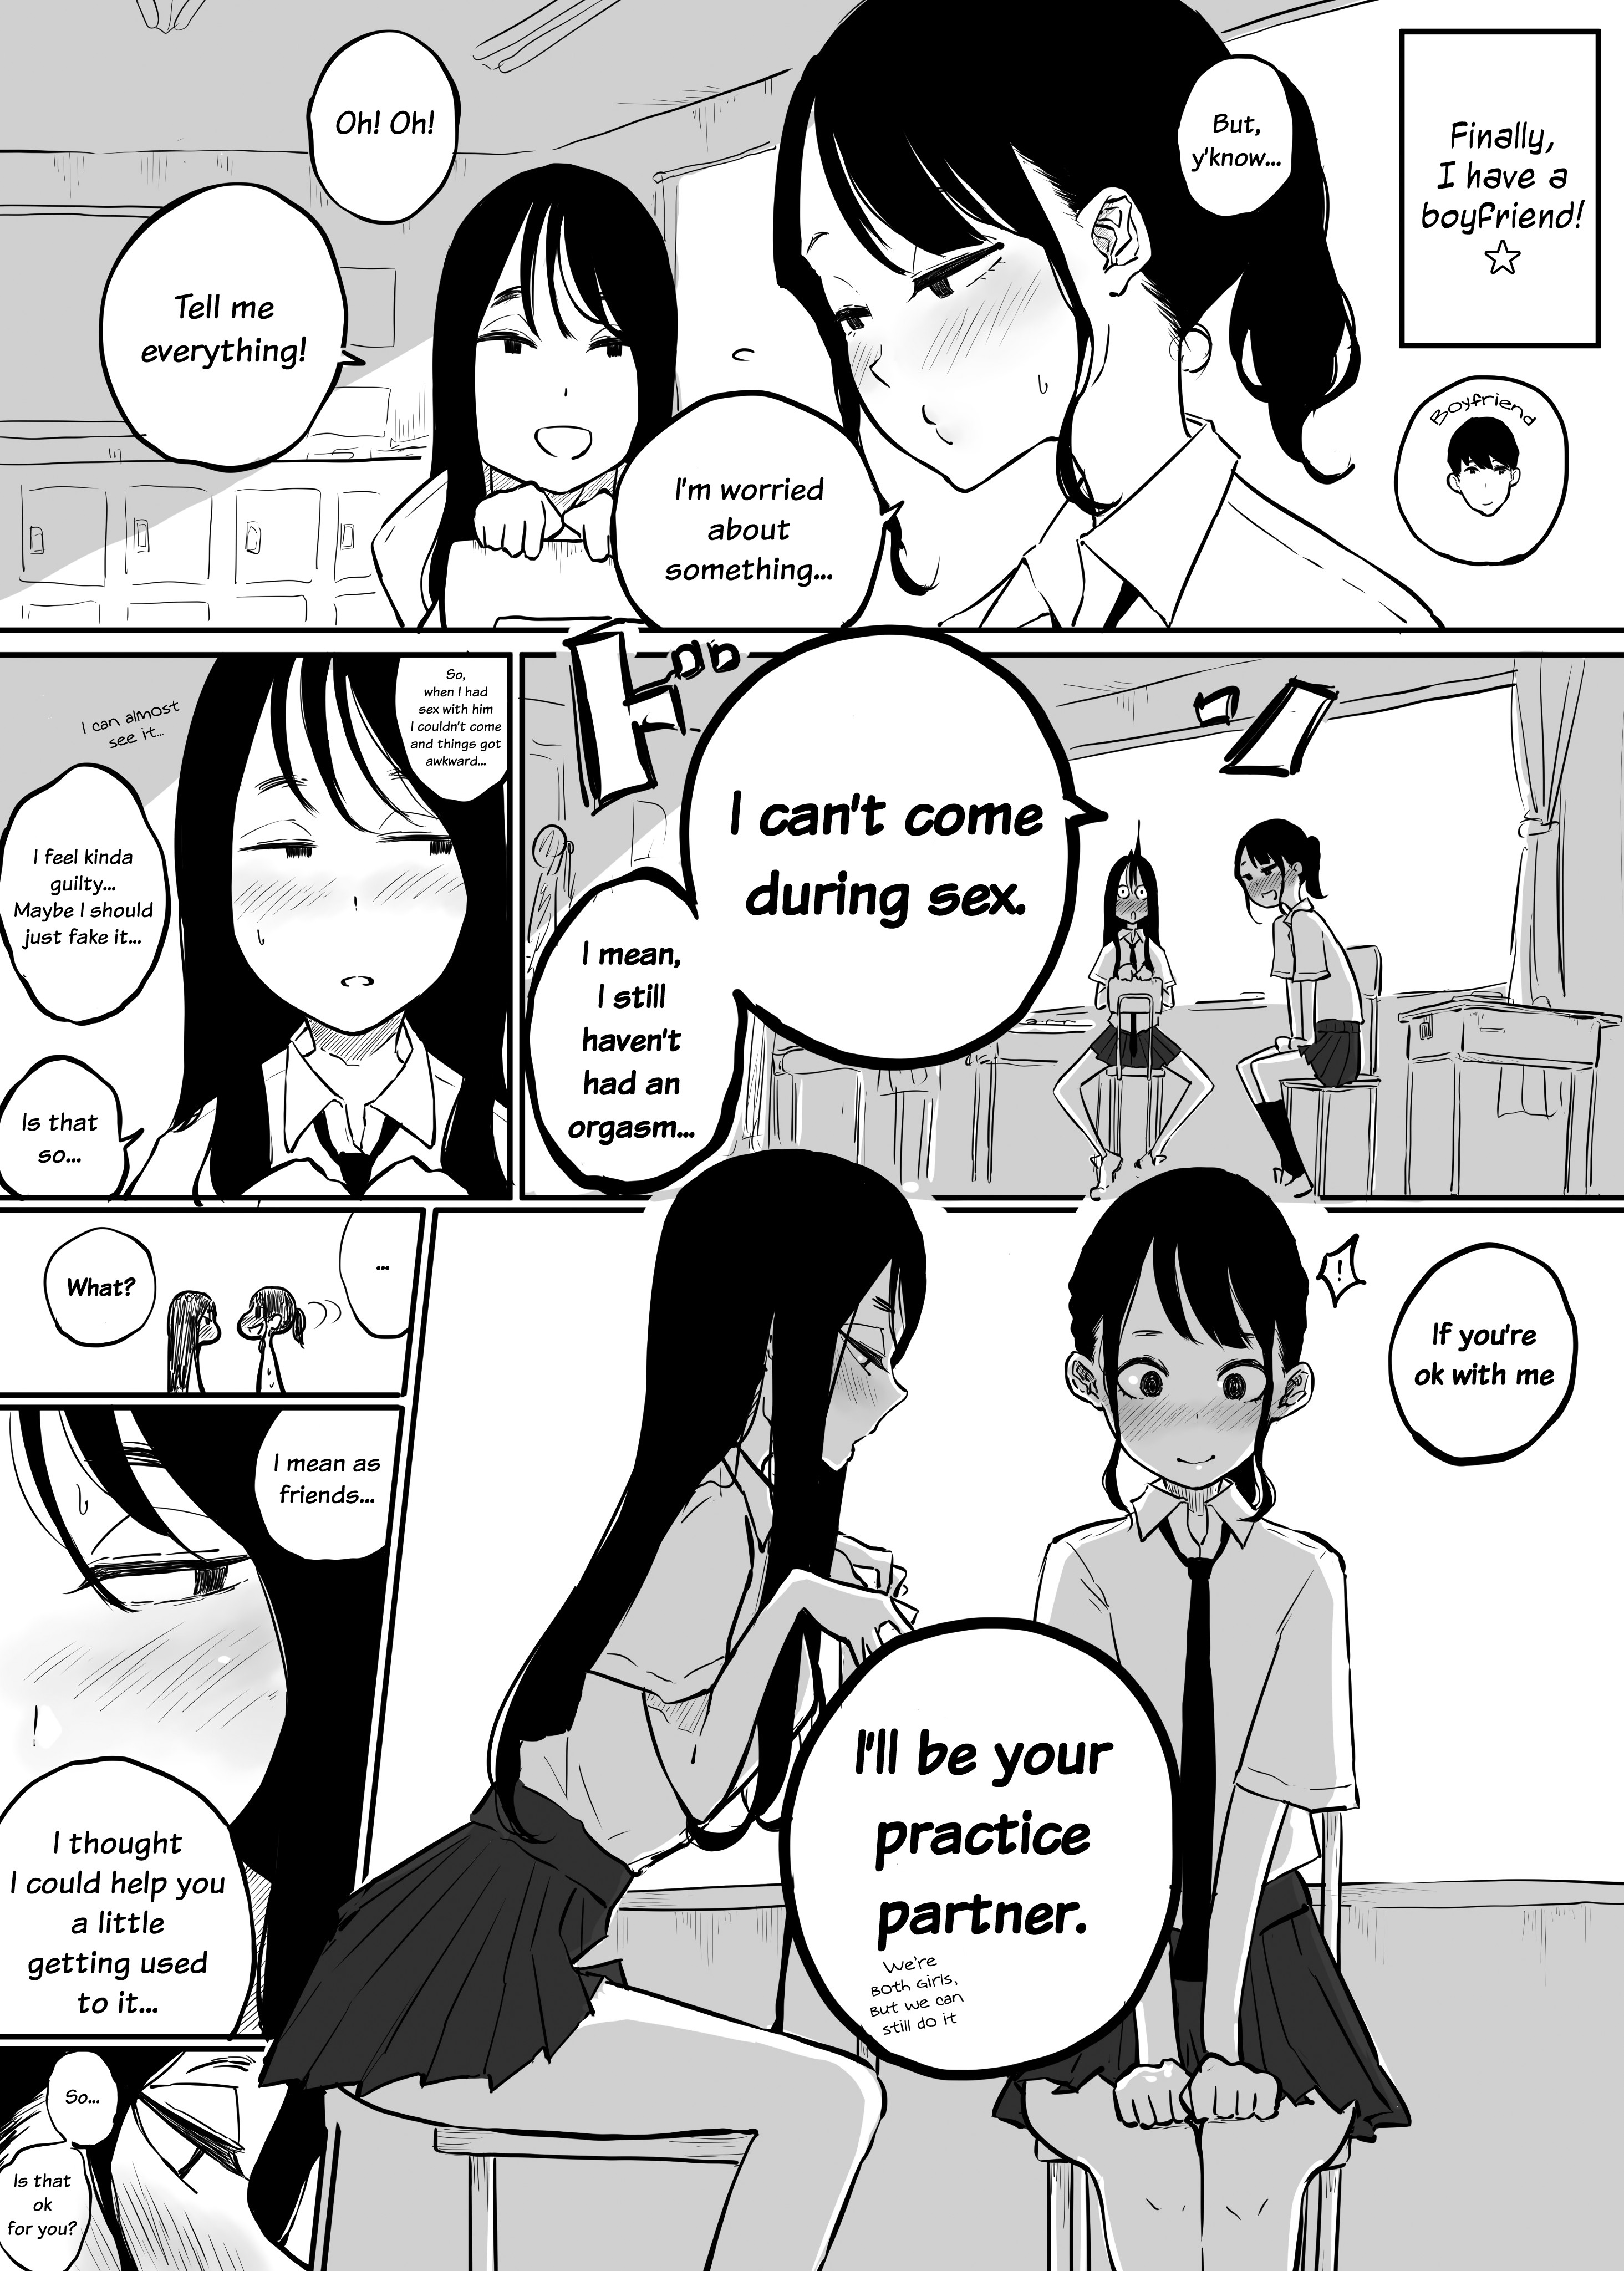 Page 1 | My Female Friend Became My Practice Partner So I Can Get Better at  Sex with my Boyfriend - Original Hentai Doujinshi by Pandacorya - Pururin,  Free Online Hentai Manga and Doujinshi Reader